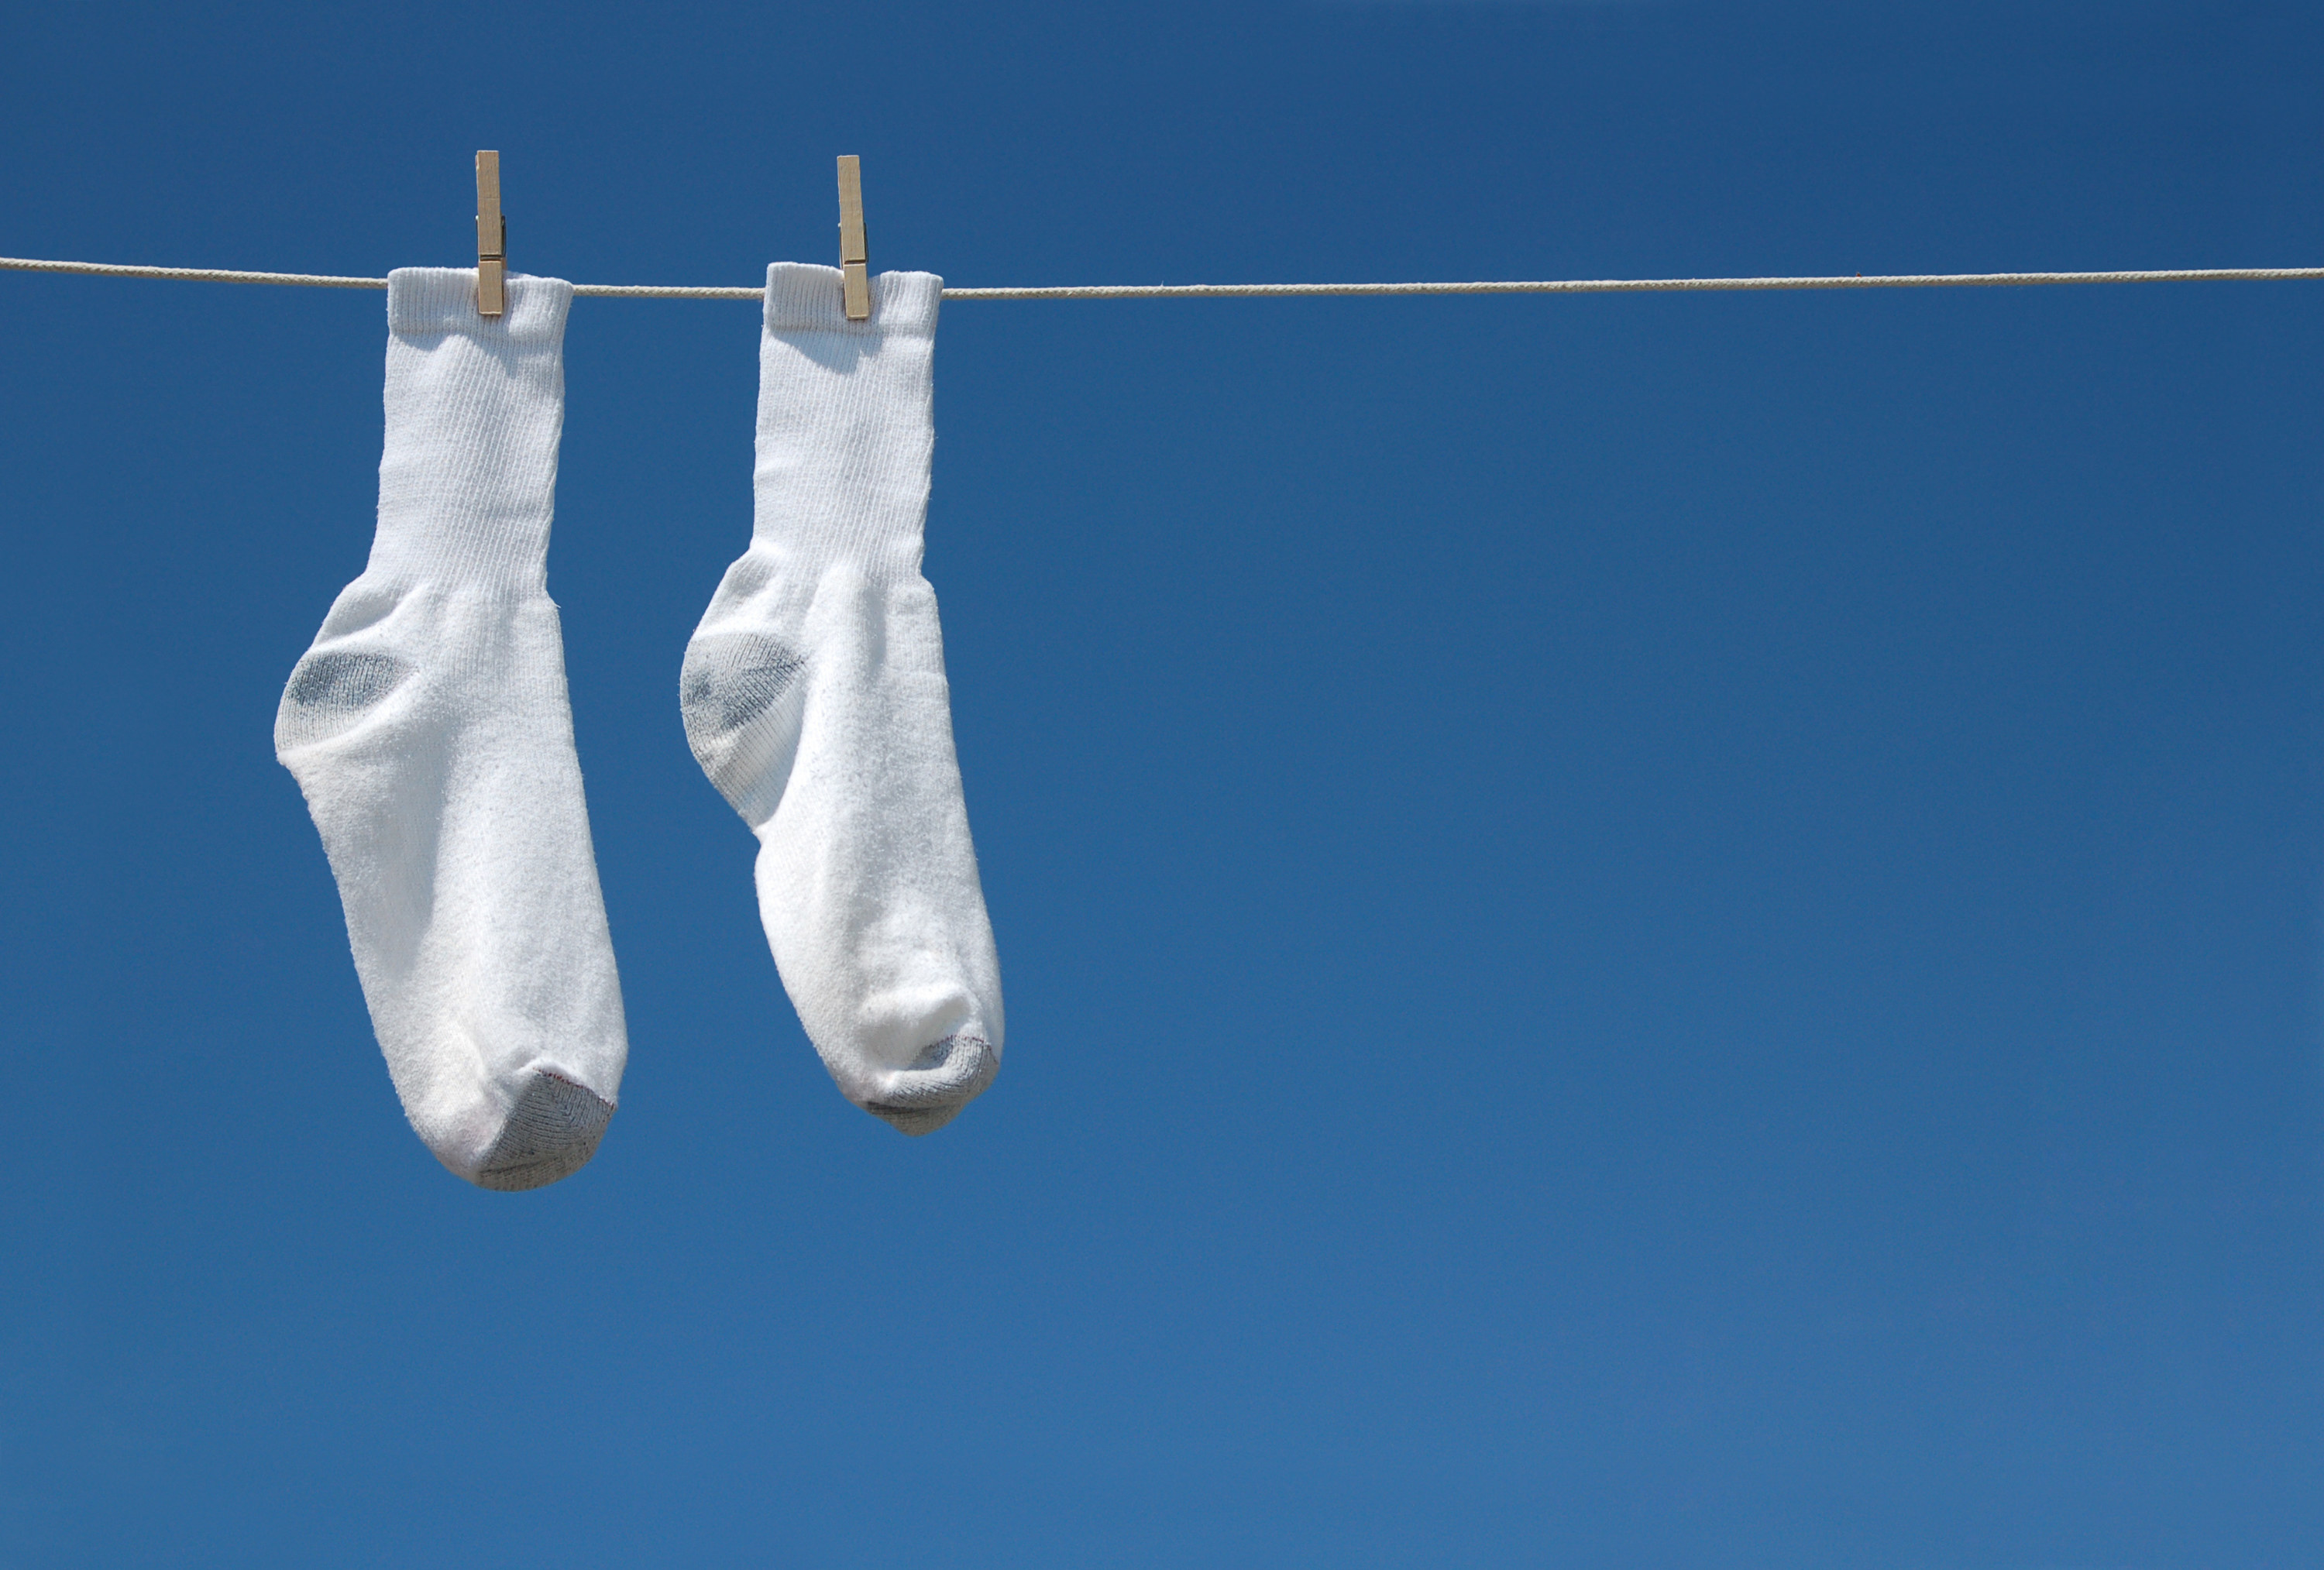 pair of socks hanging from a clothes hanger